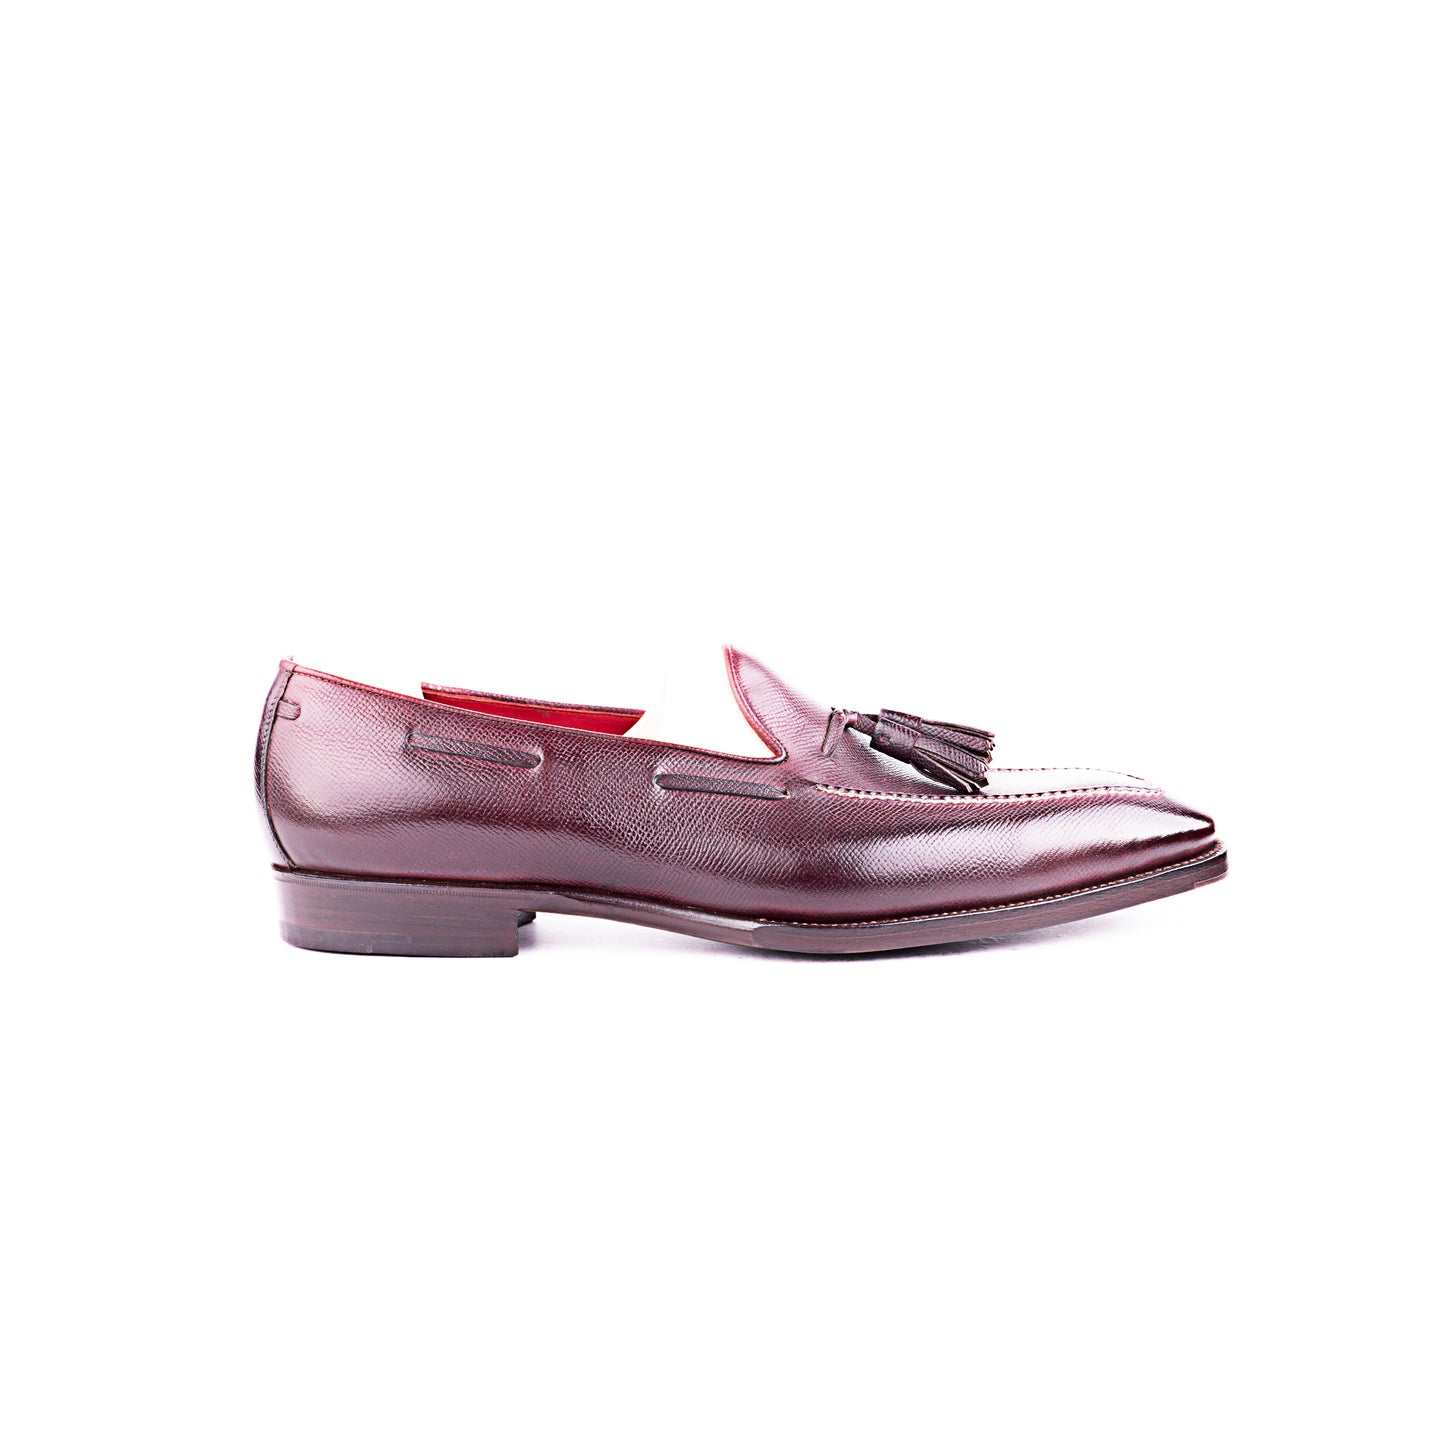 Tassel loafer with hand stitched apron, squared tip for chiseled lasts - 10.5F